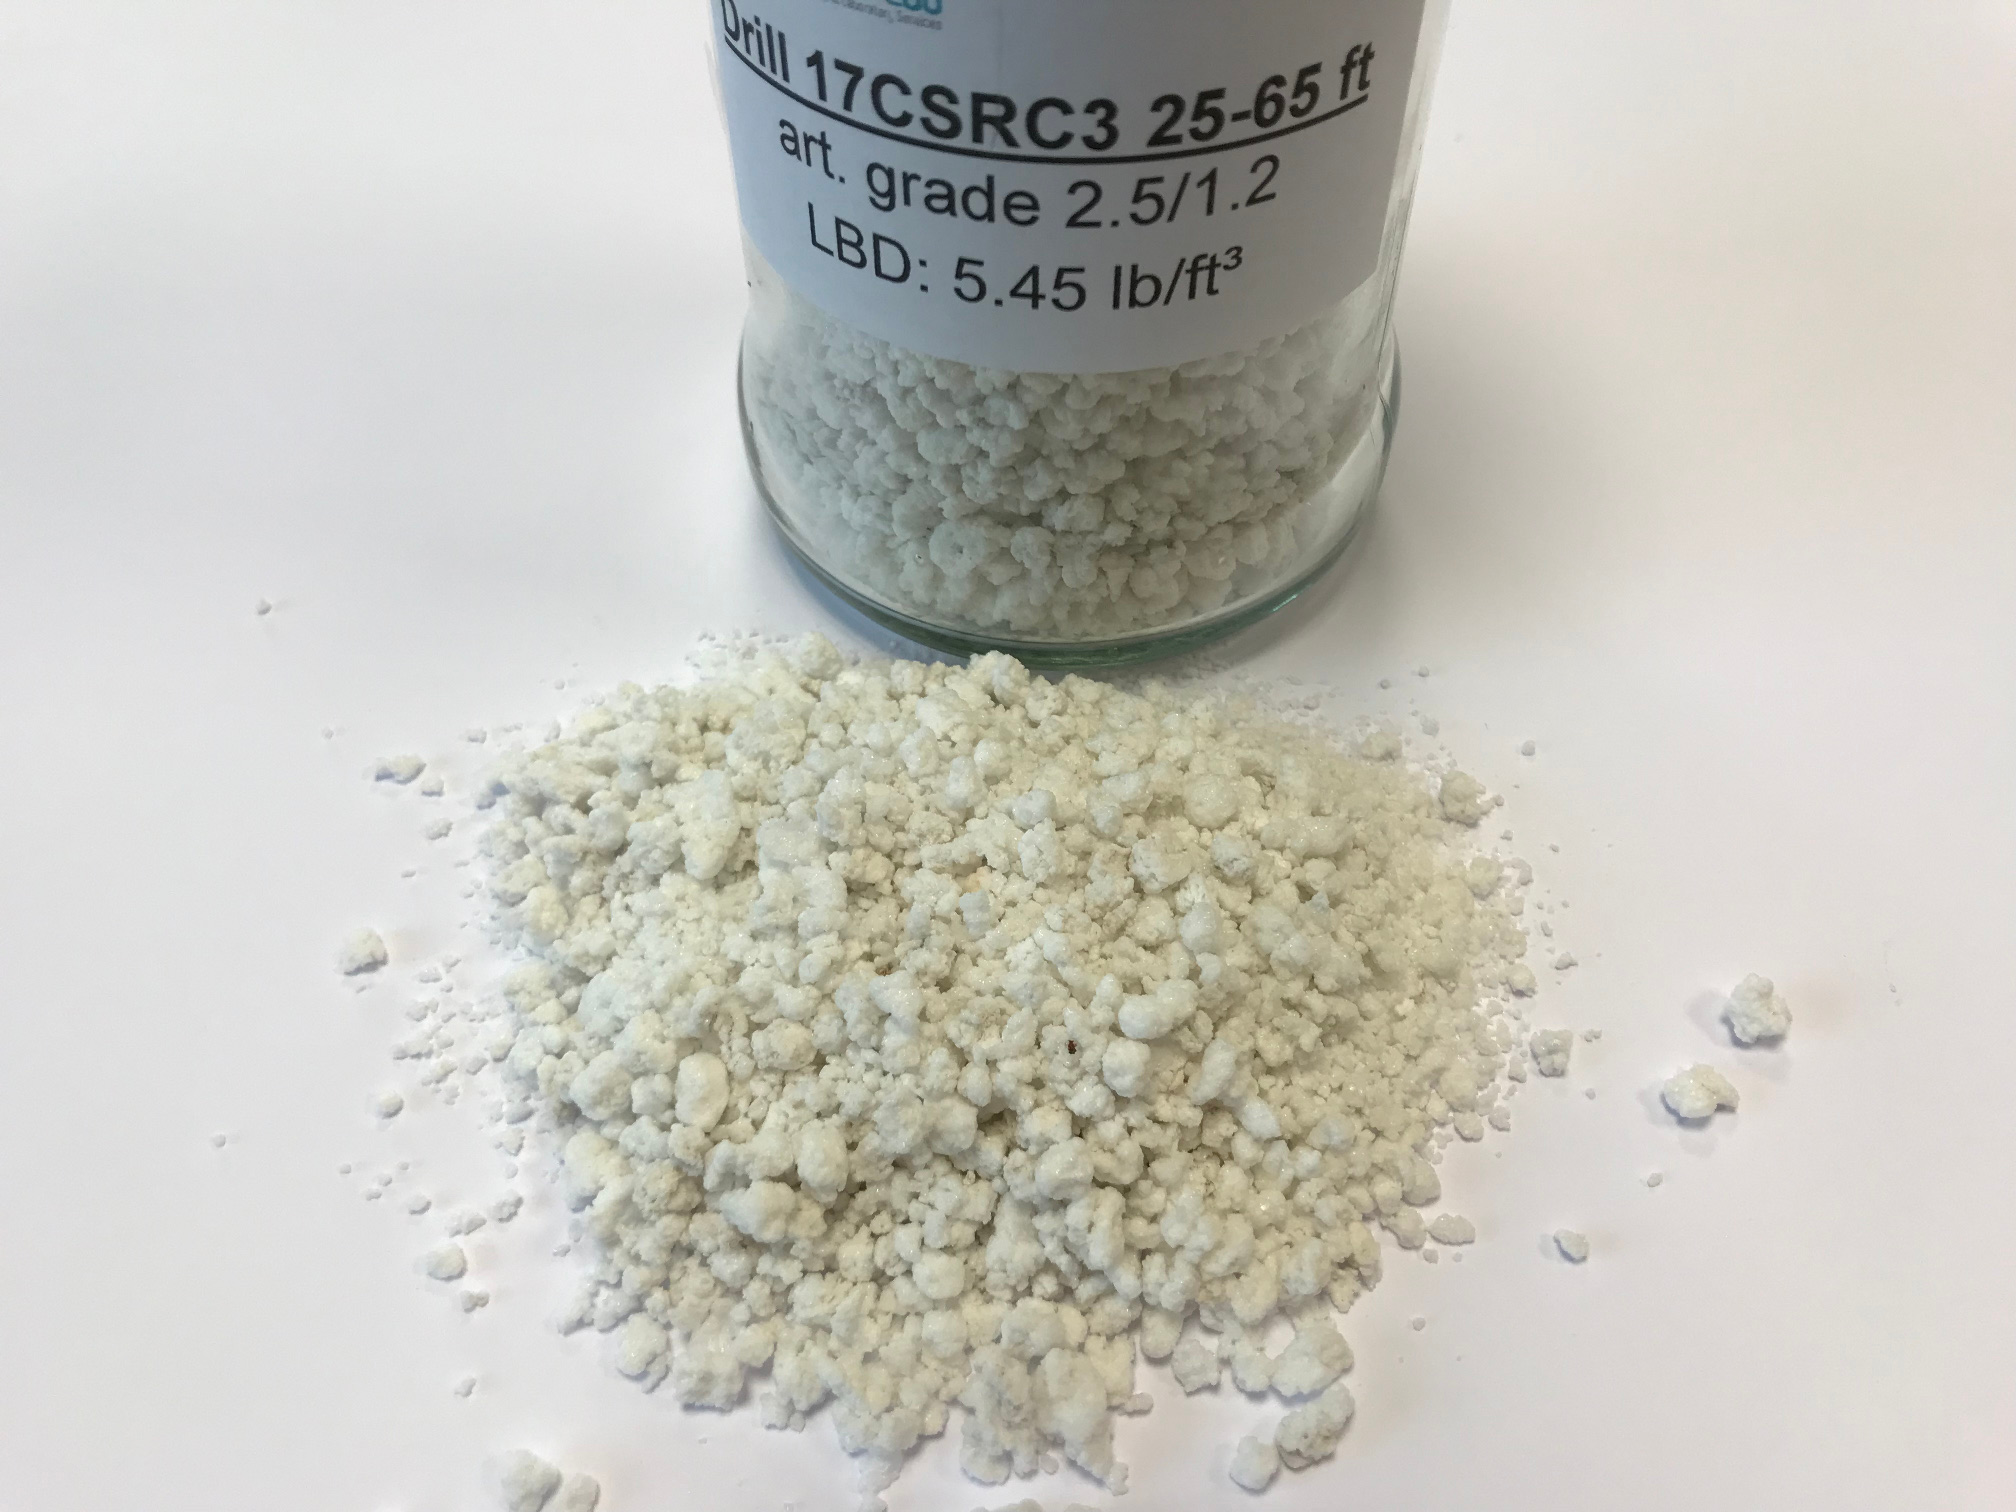 Coarse grade expanded perlite from CS drill hole 17CSRC3